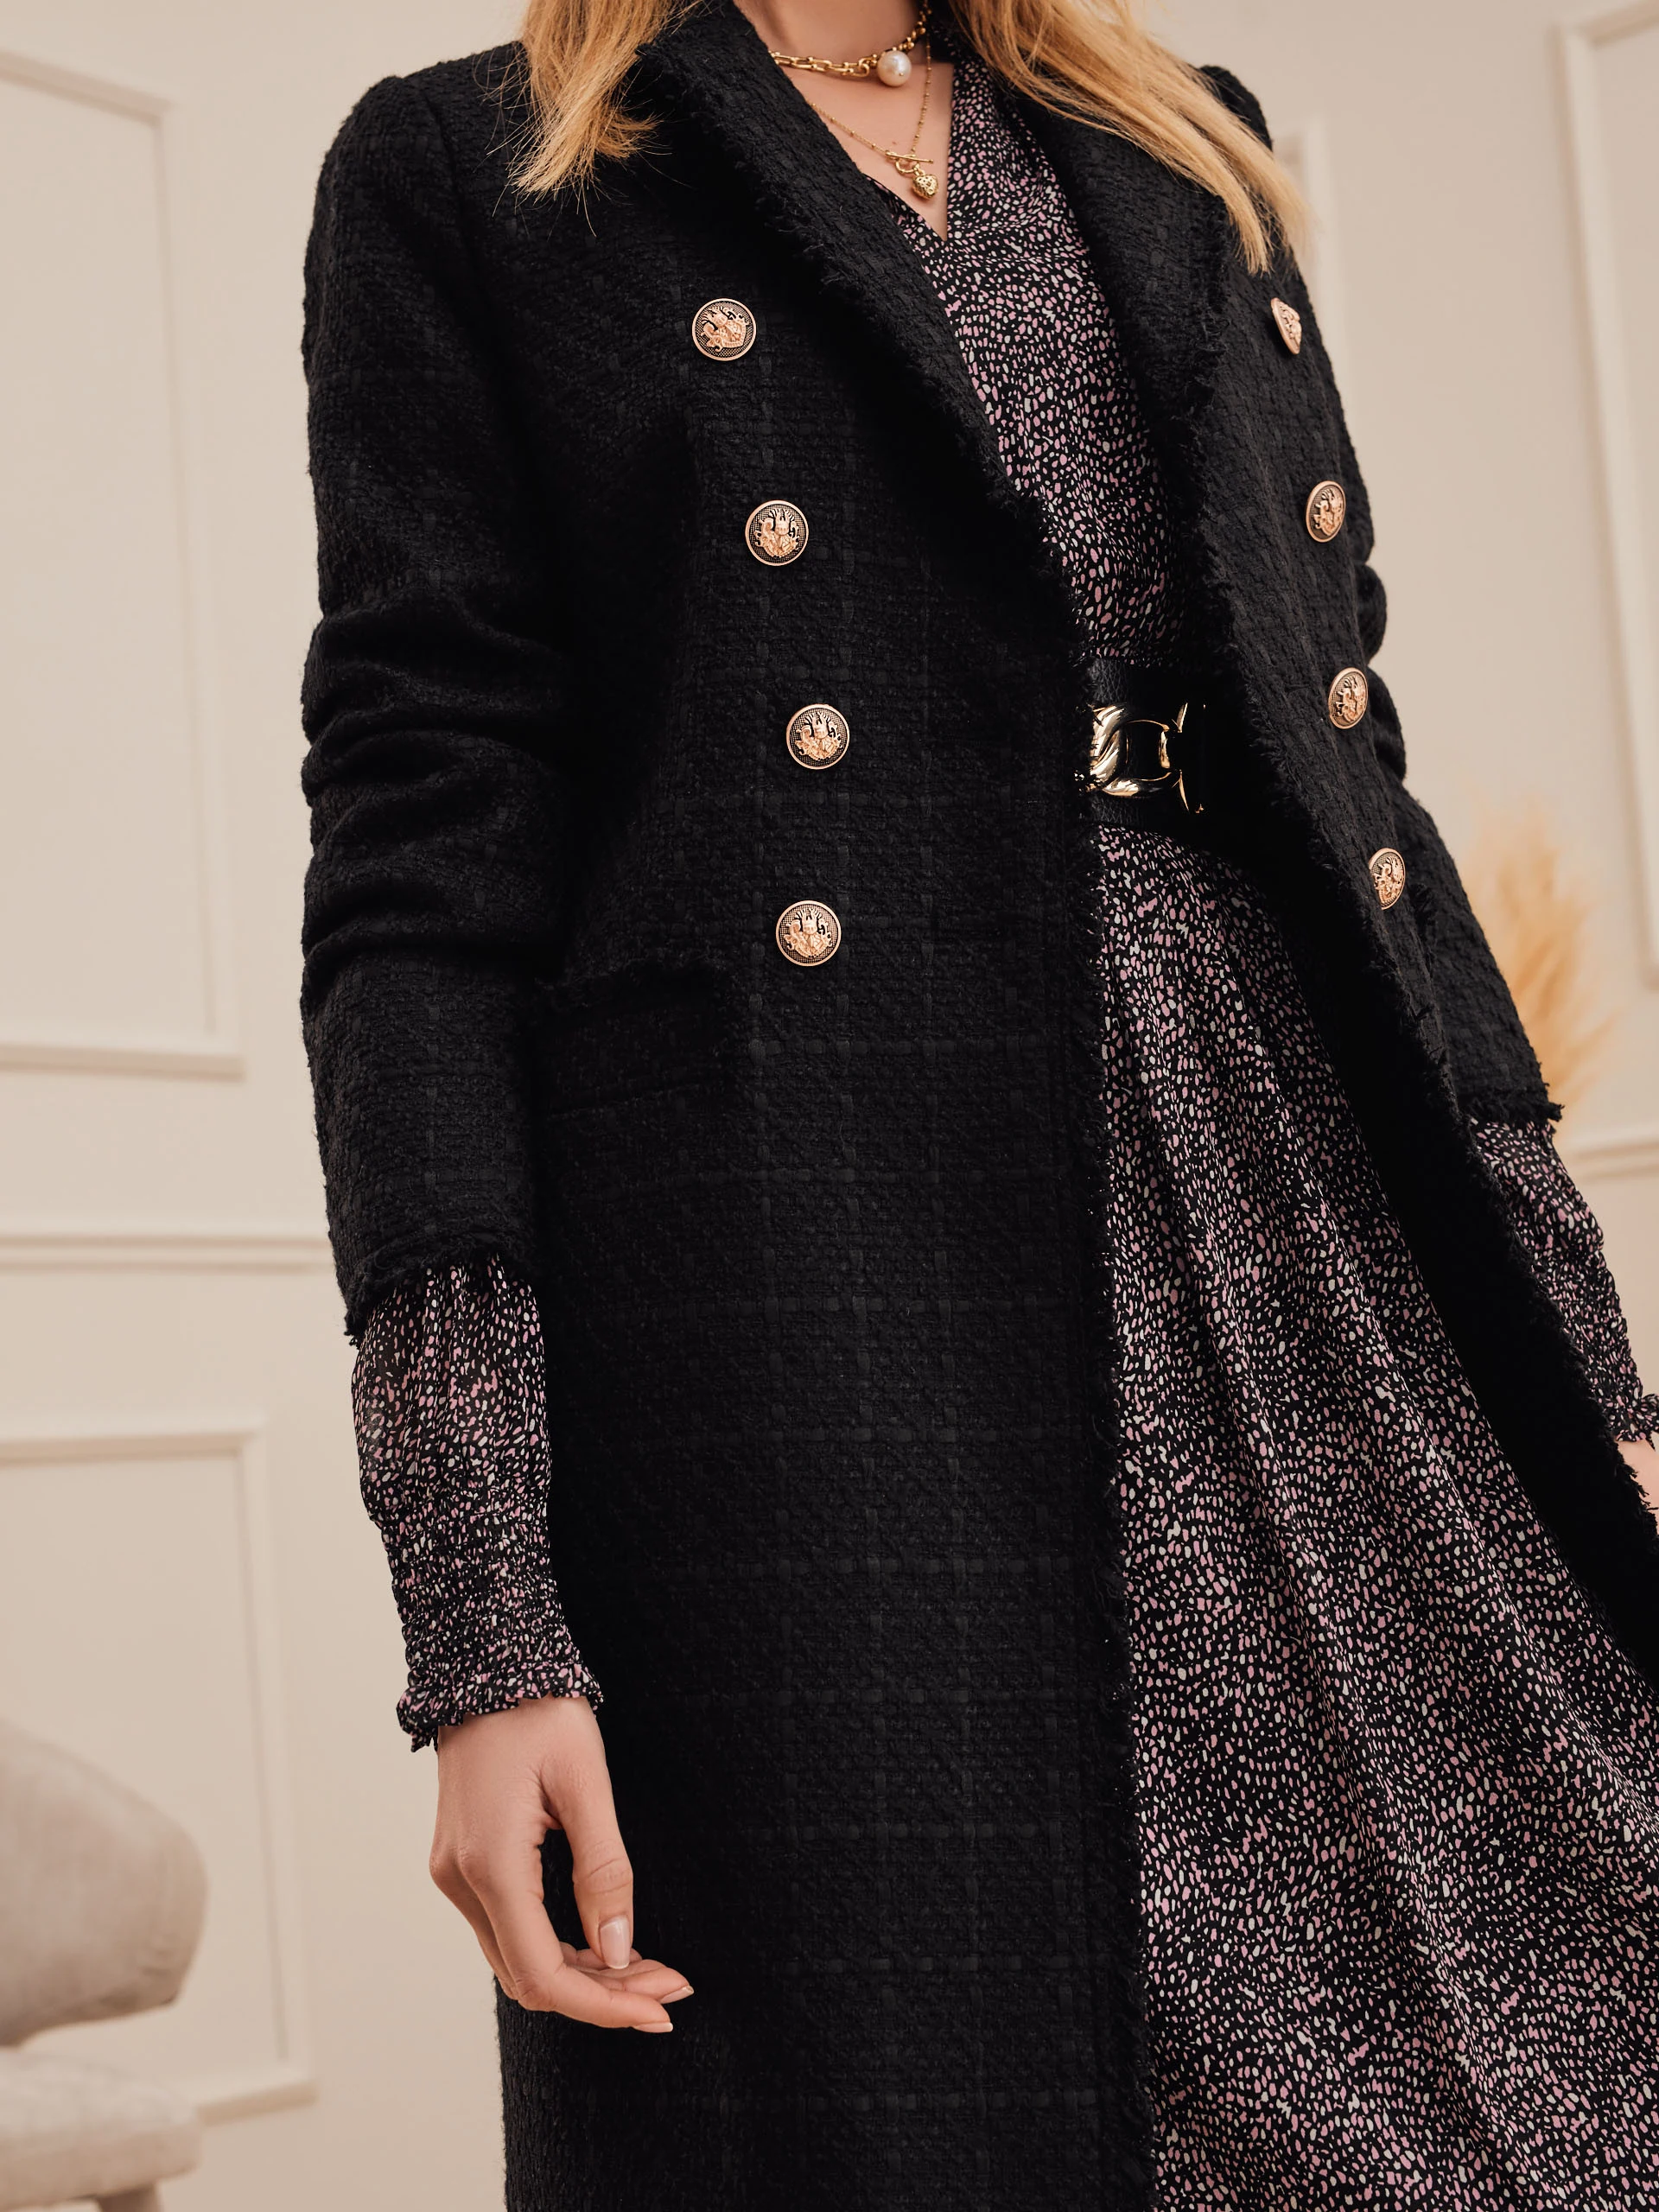 BLACK TWEED COAT WITH BUTTONS